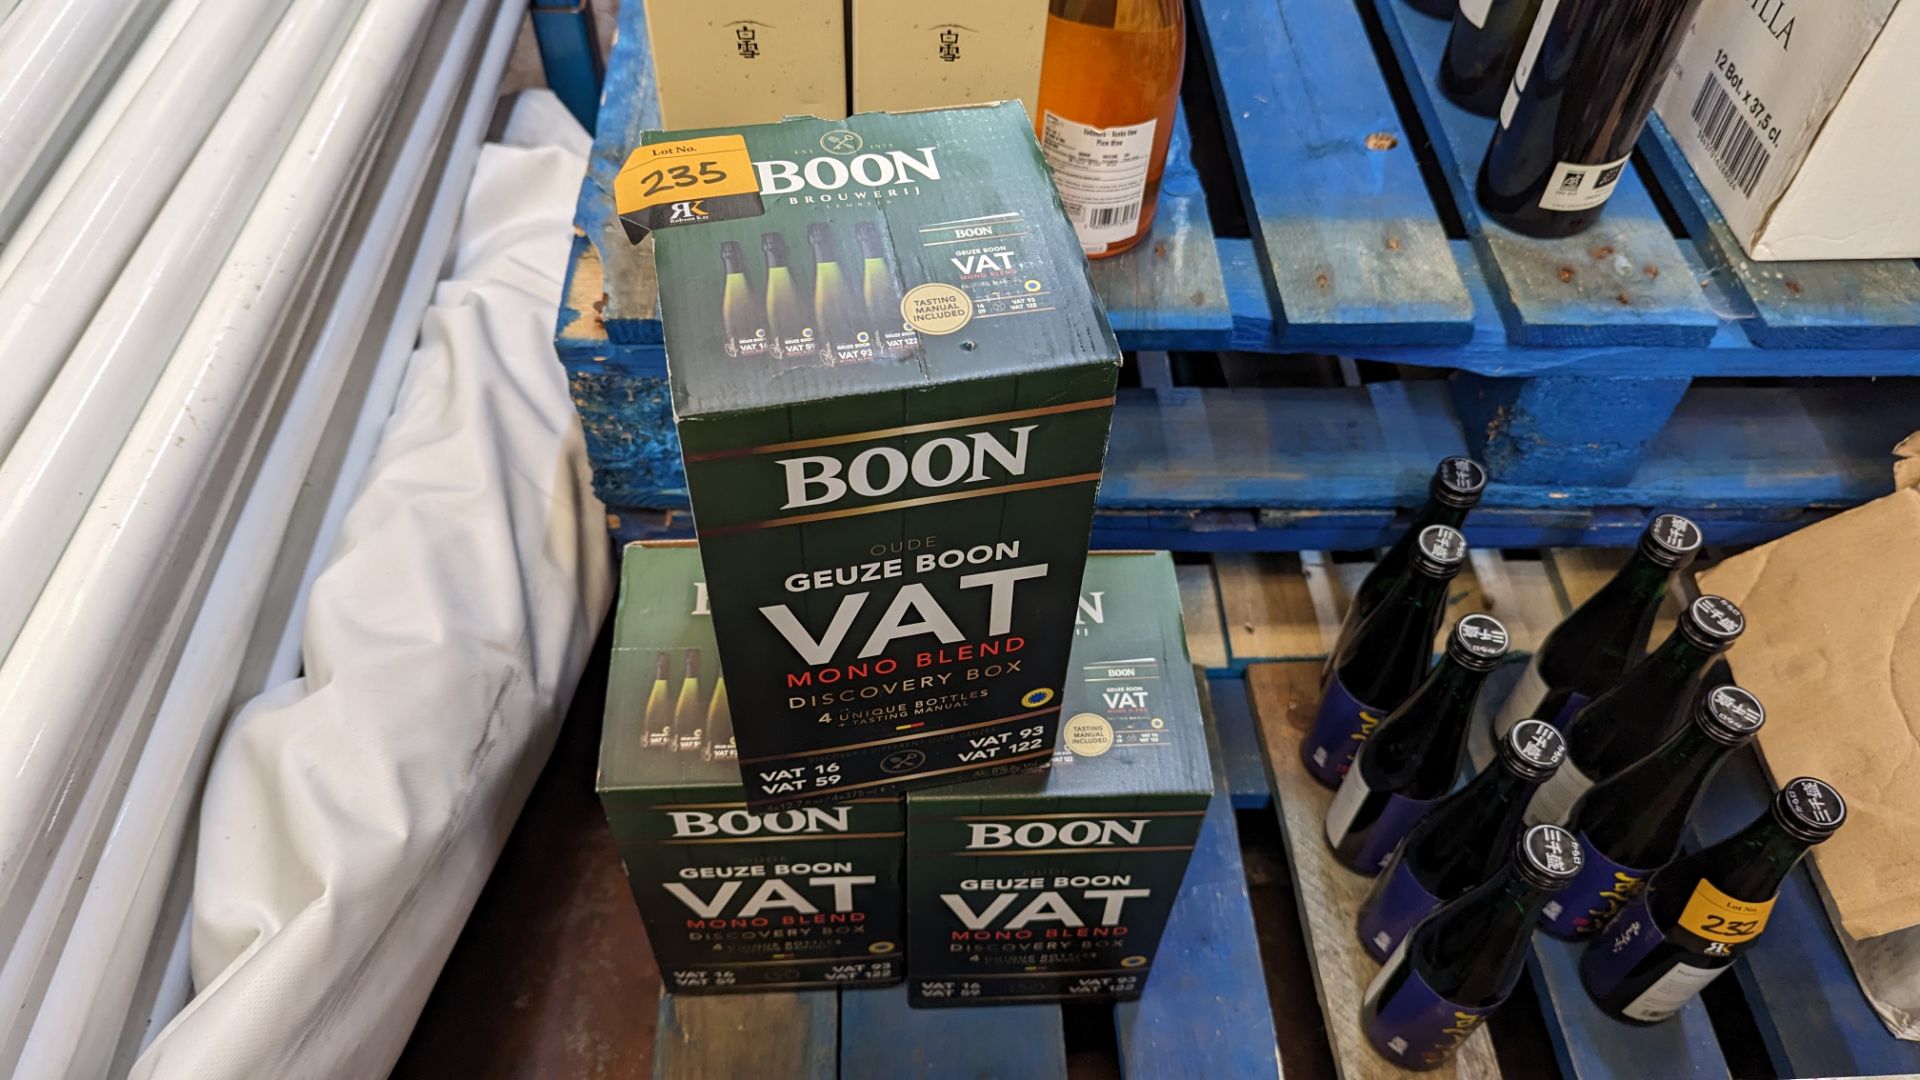 3 off Boon Oude Geuze Boon VAT mono blend discovery boxes, each box containing 4 unique bottles, 8% - Image 2 of 7